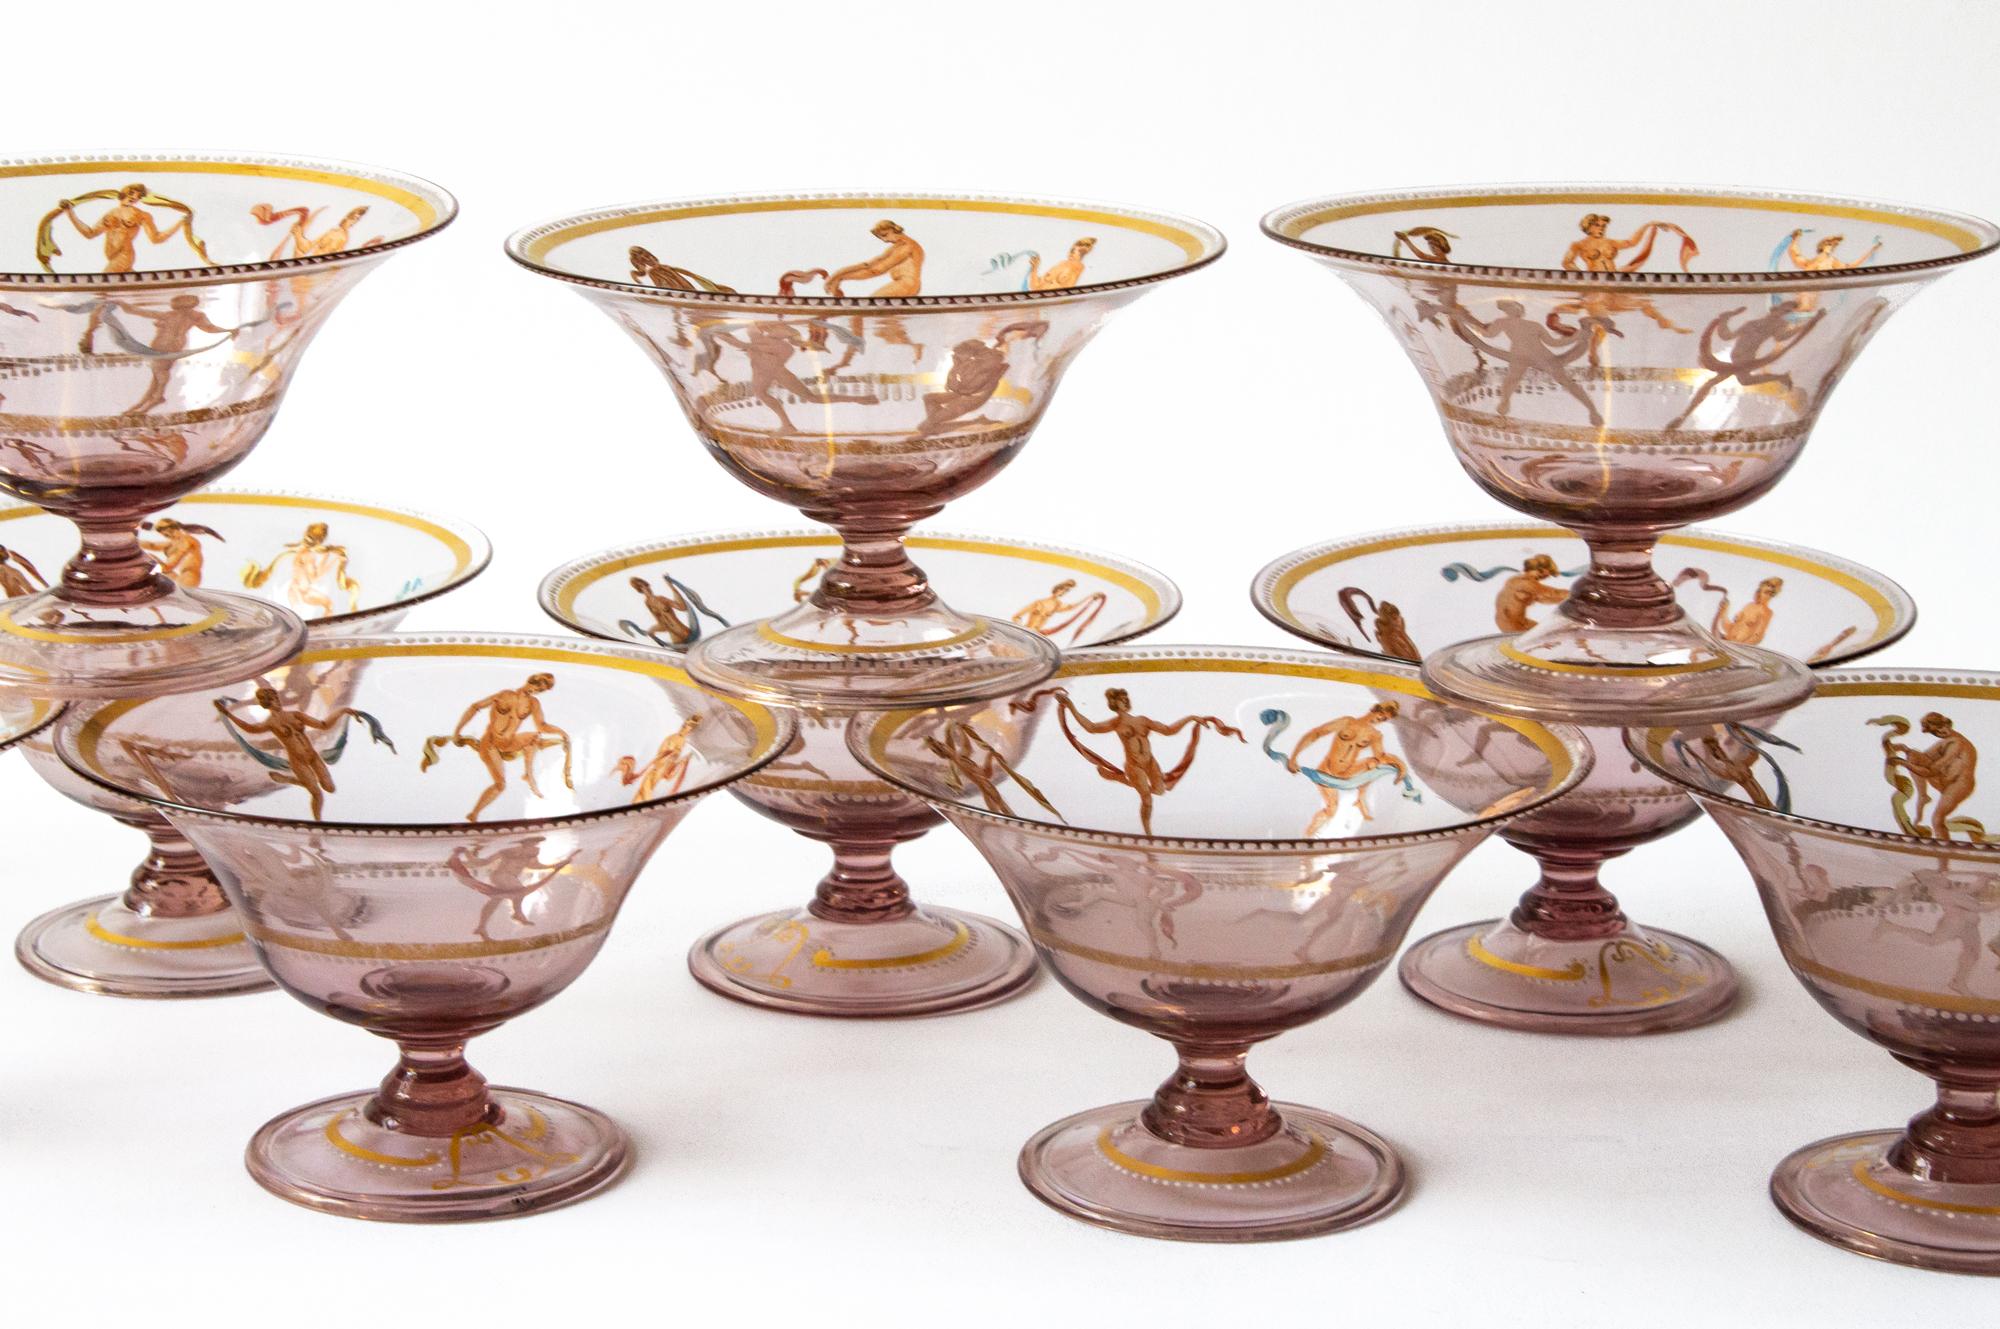 12 Art Deco enameled Venetian amethyst glasses with gold foliate and latticework. Made in the 1930s, atttributed to Salviati, in Venice Italy these glasses are impeccably well made and delicately hand-blown with a vibrant rococo revival motif.